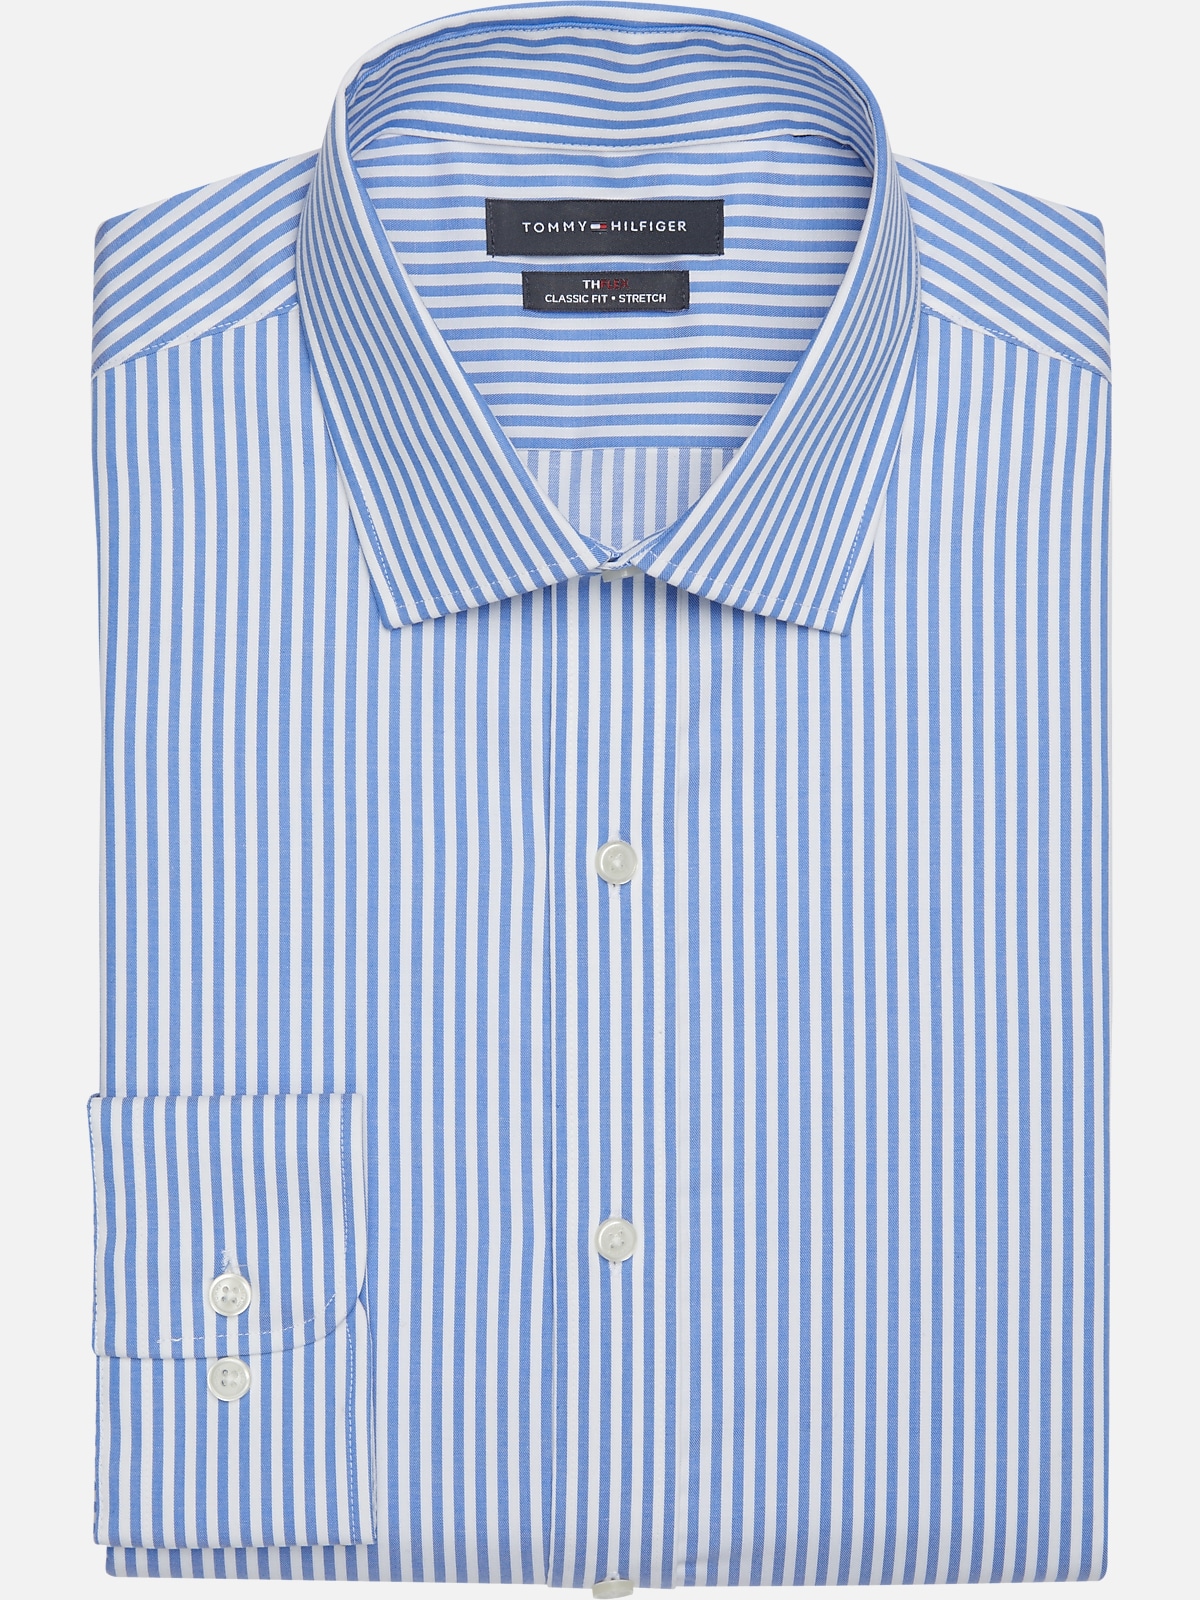 https://image.menswearhouse.com/is/image/TMW/TMW_5FY9_32_TOMMY_HILFIGER_DRESS_SHIRTS_BLUE_STRIPE_MAIN?imPolicy=pdp-zoom-mob